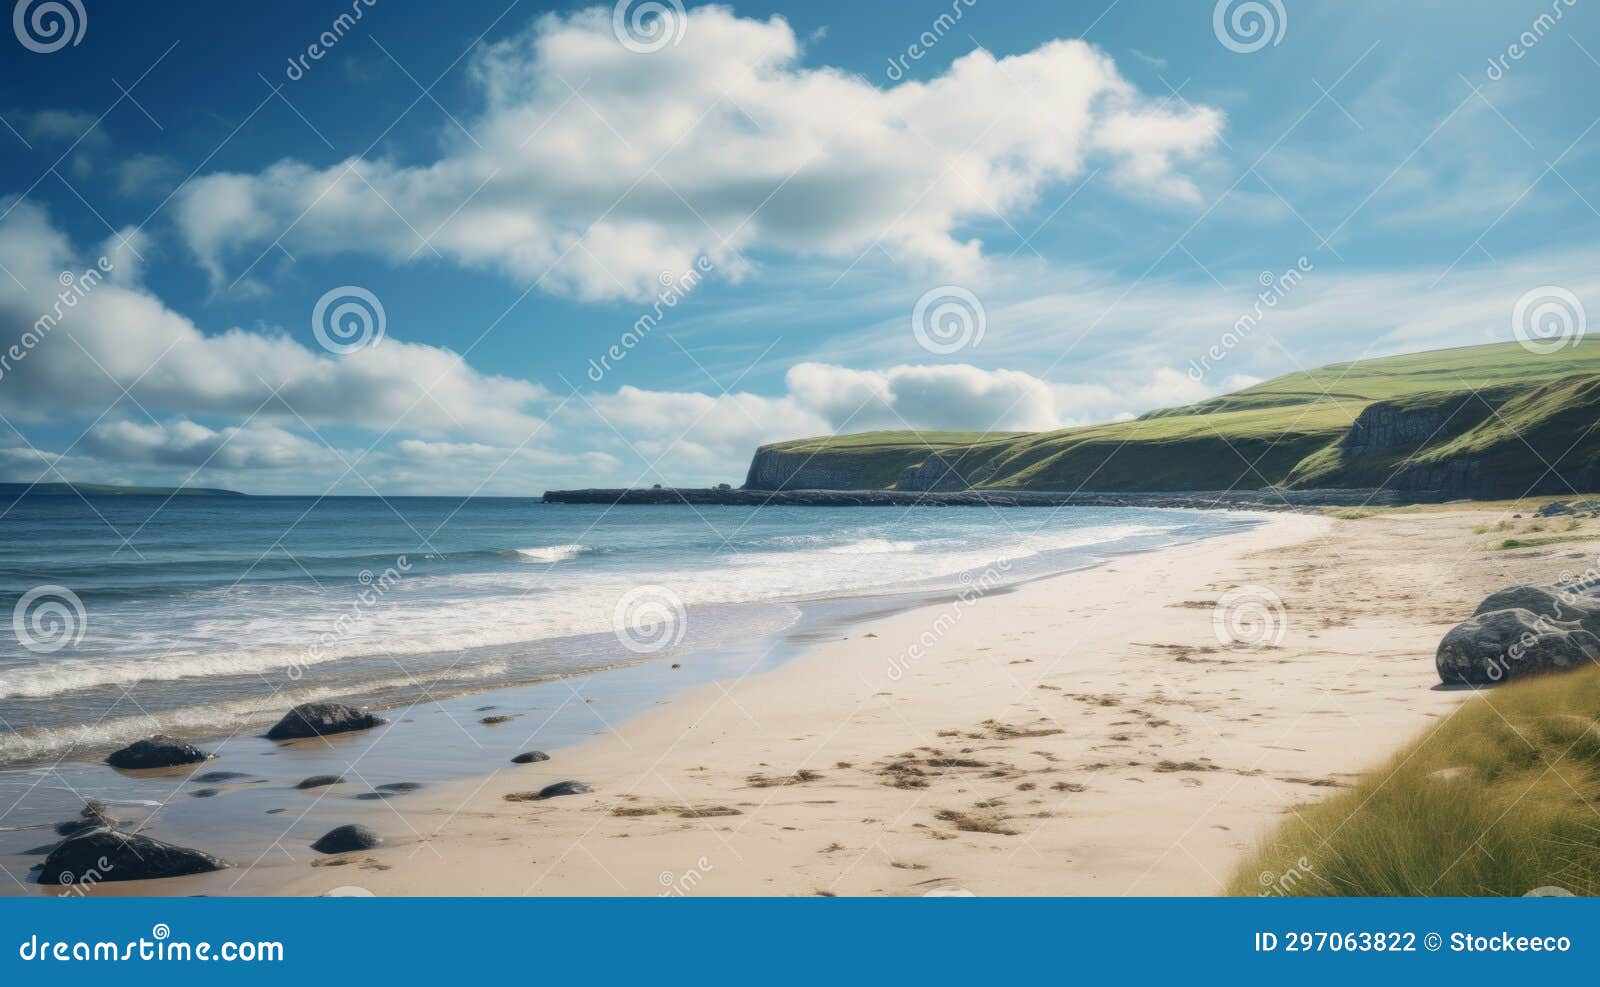 dreamy beachscape in hindu yorkshire dales